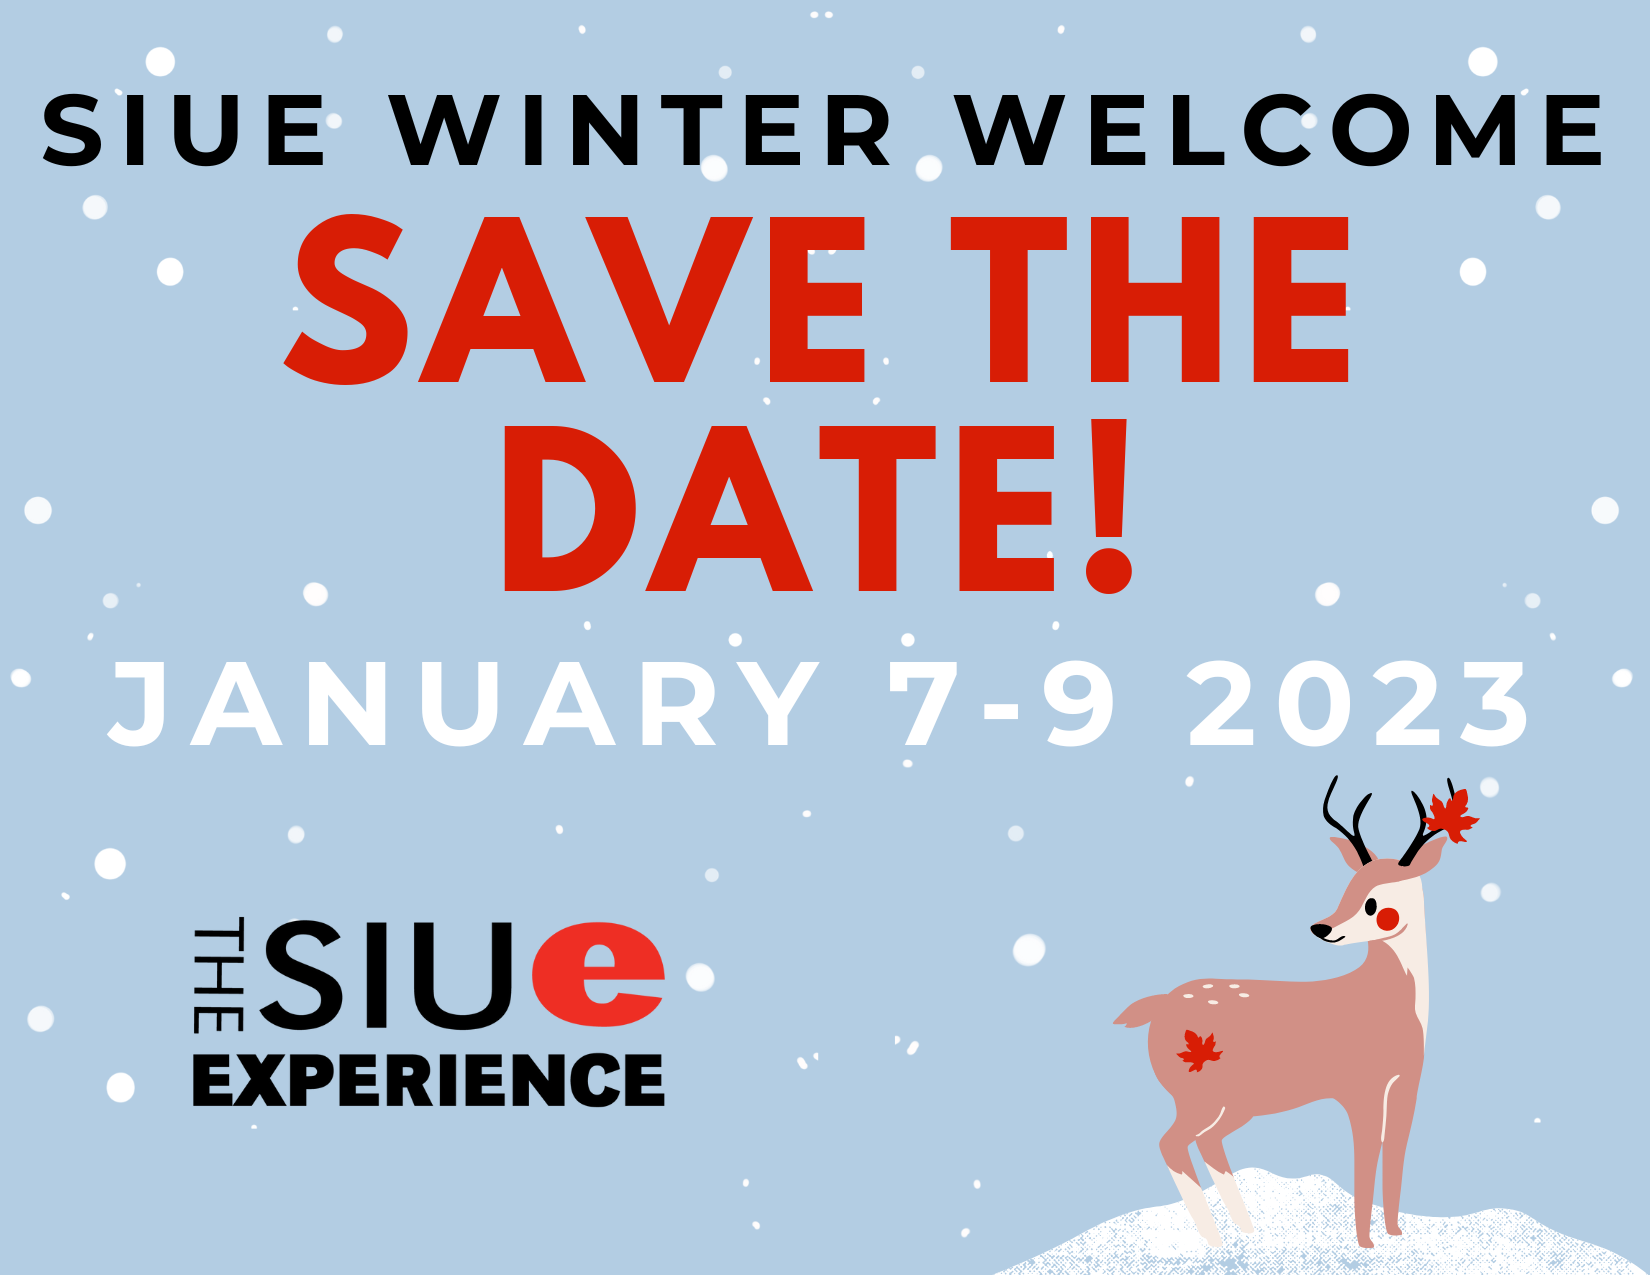 There is an image of a blue postcard that says "SIUE Winter Welcome" in Black and then "Save the Date!" in red. Under that it says January 7-9 2023 in white text. In the left corner the SIUE Experience logo is there and in the right there is a cartoon deer with a red leaf stuck in it's antler.